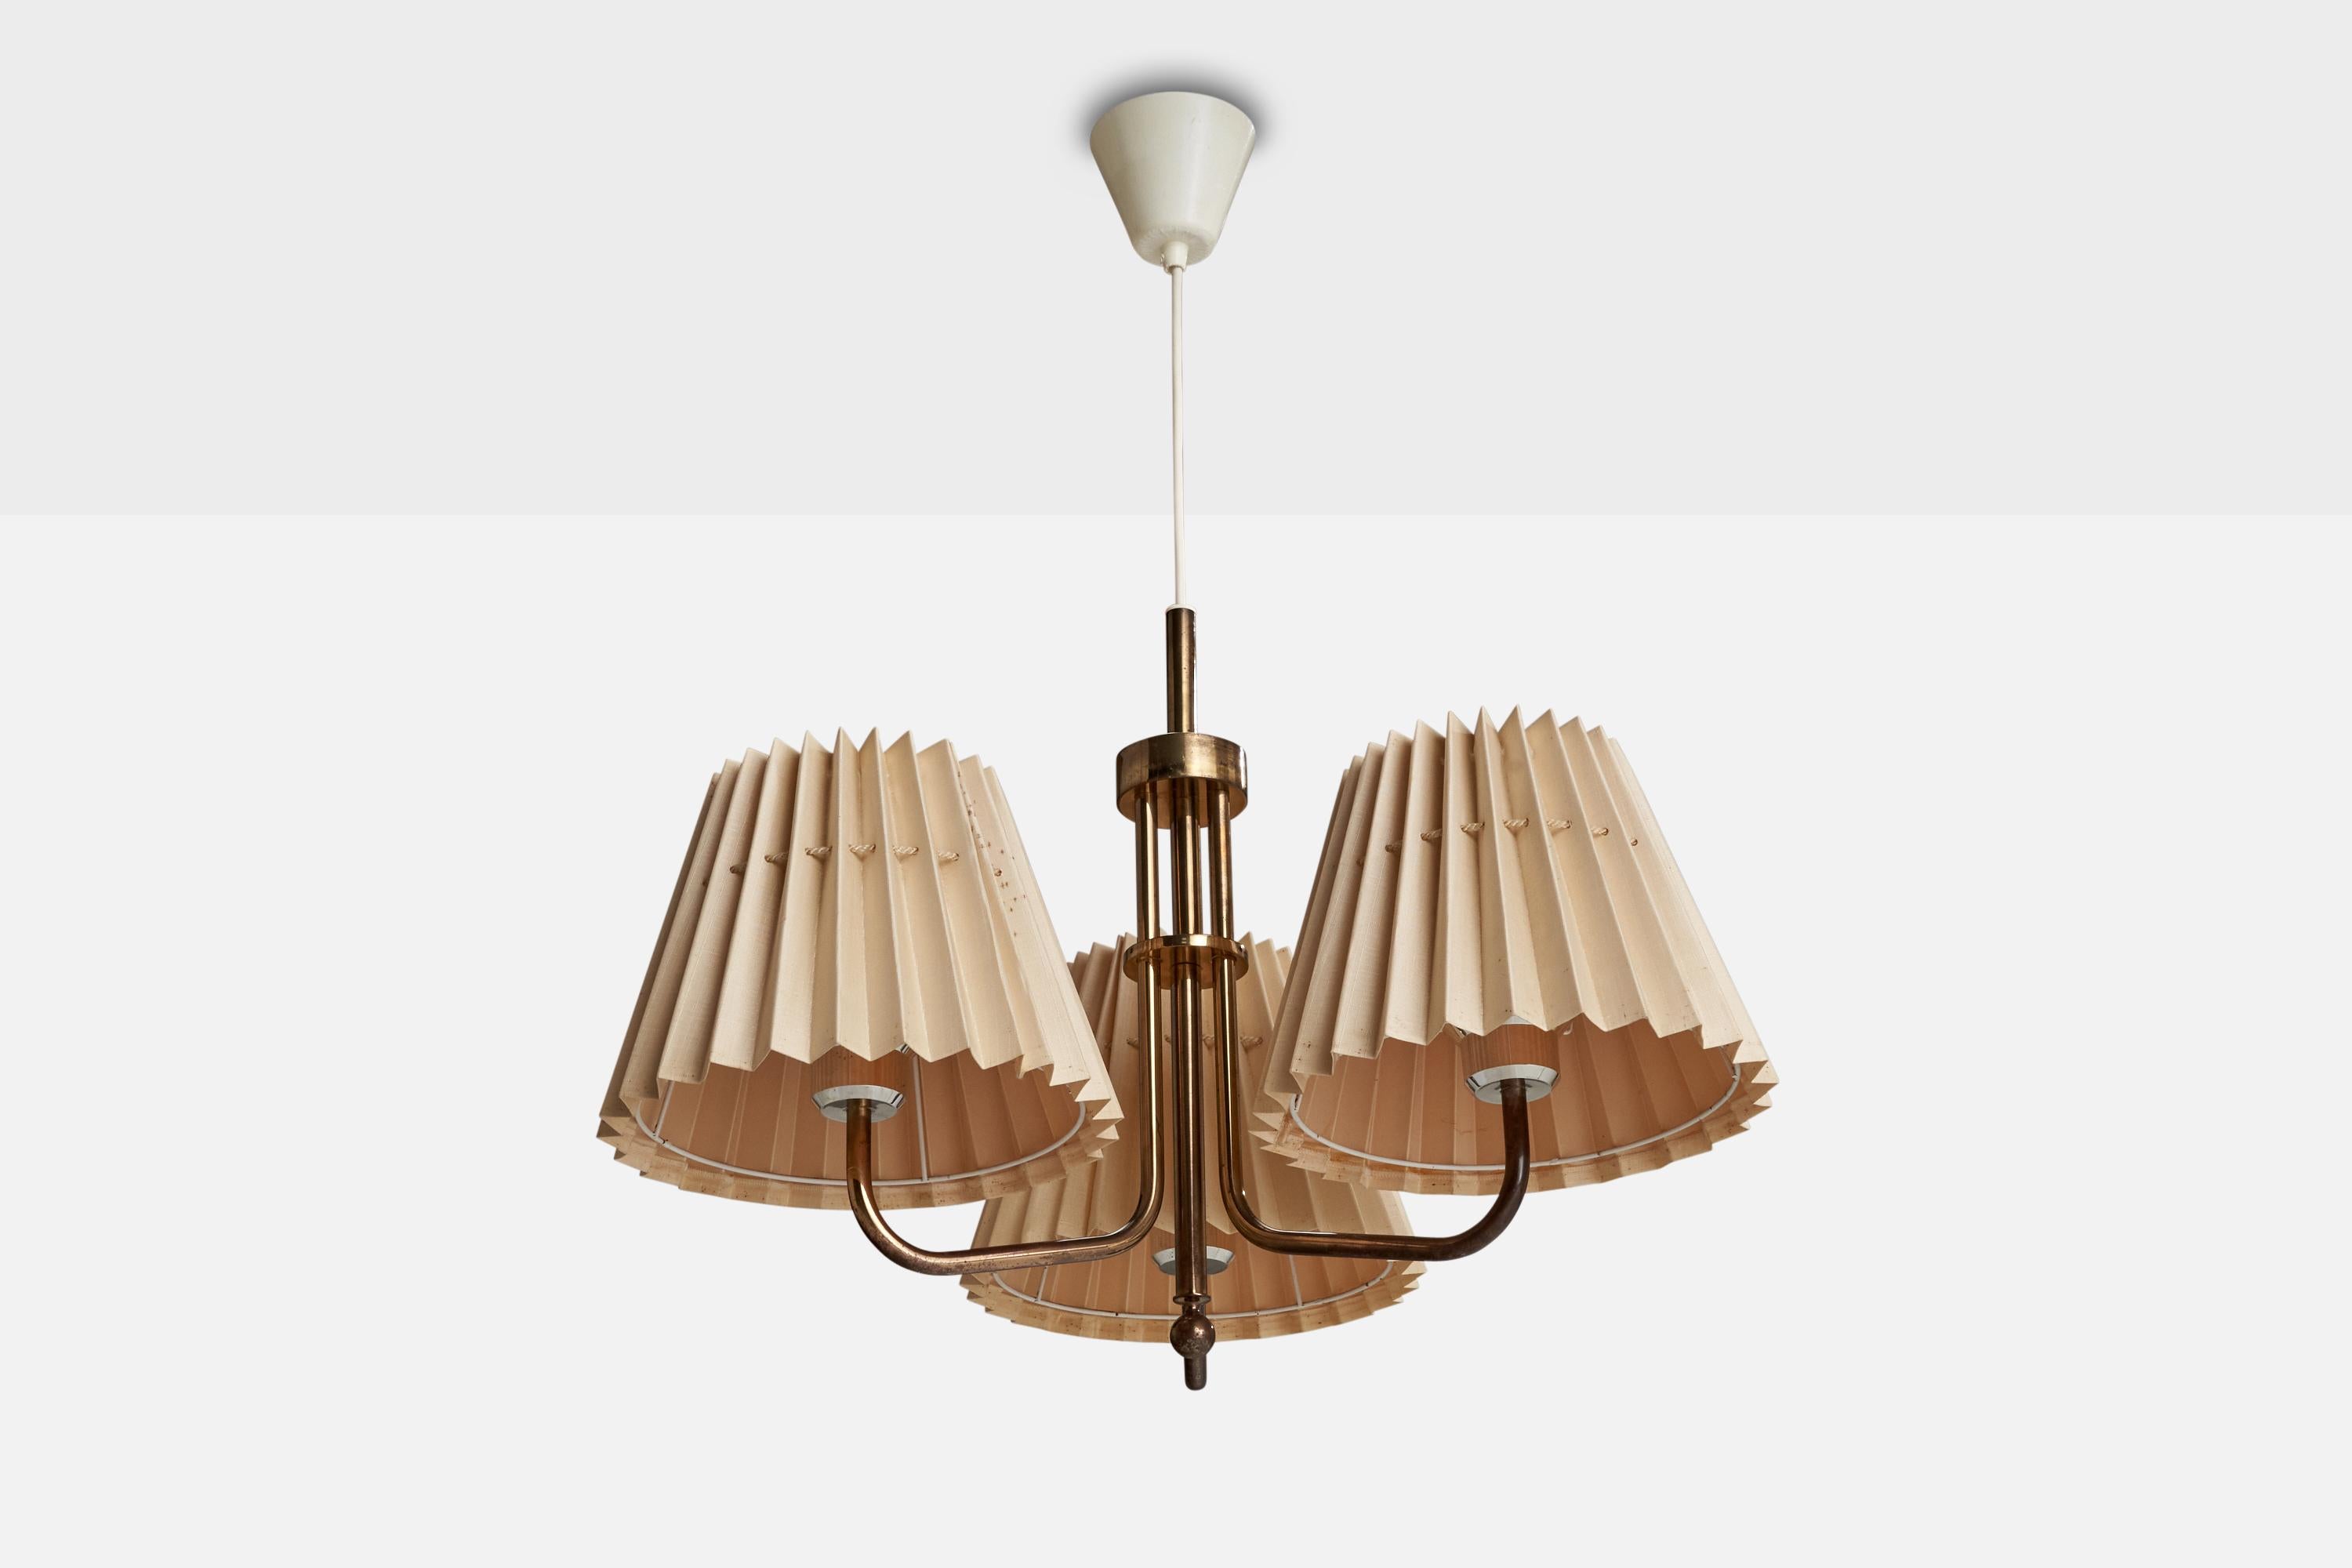 A brass and beige fabric chandelier designed and produced in Sweden, c. 1950s.

Discoloration to lampshades. Study images.
Dimensions of canopy (inches): 3.80” H x 3.44” Diameter
Socket takes standard E-26 bulbs. 3 socket.There is no maximum wattage